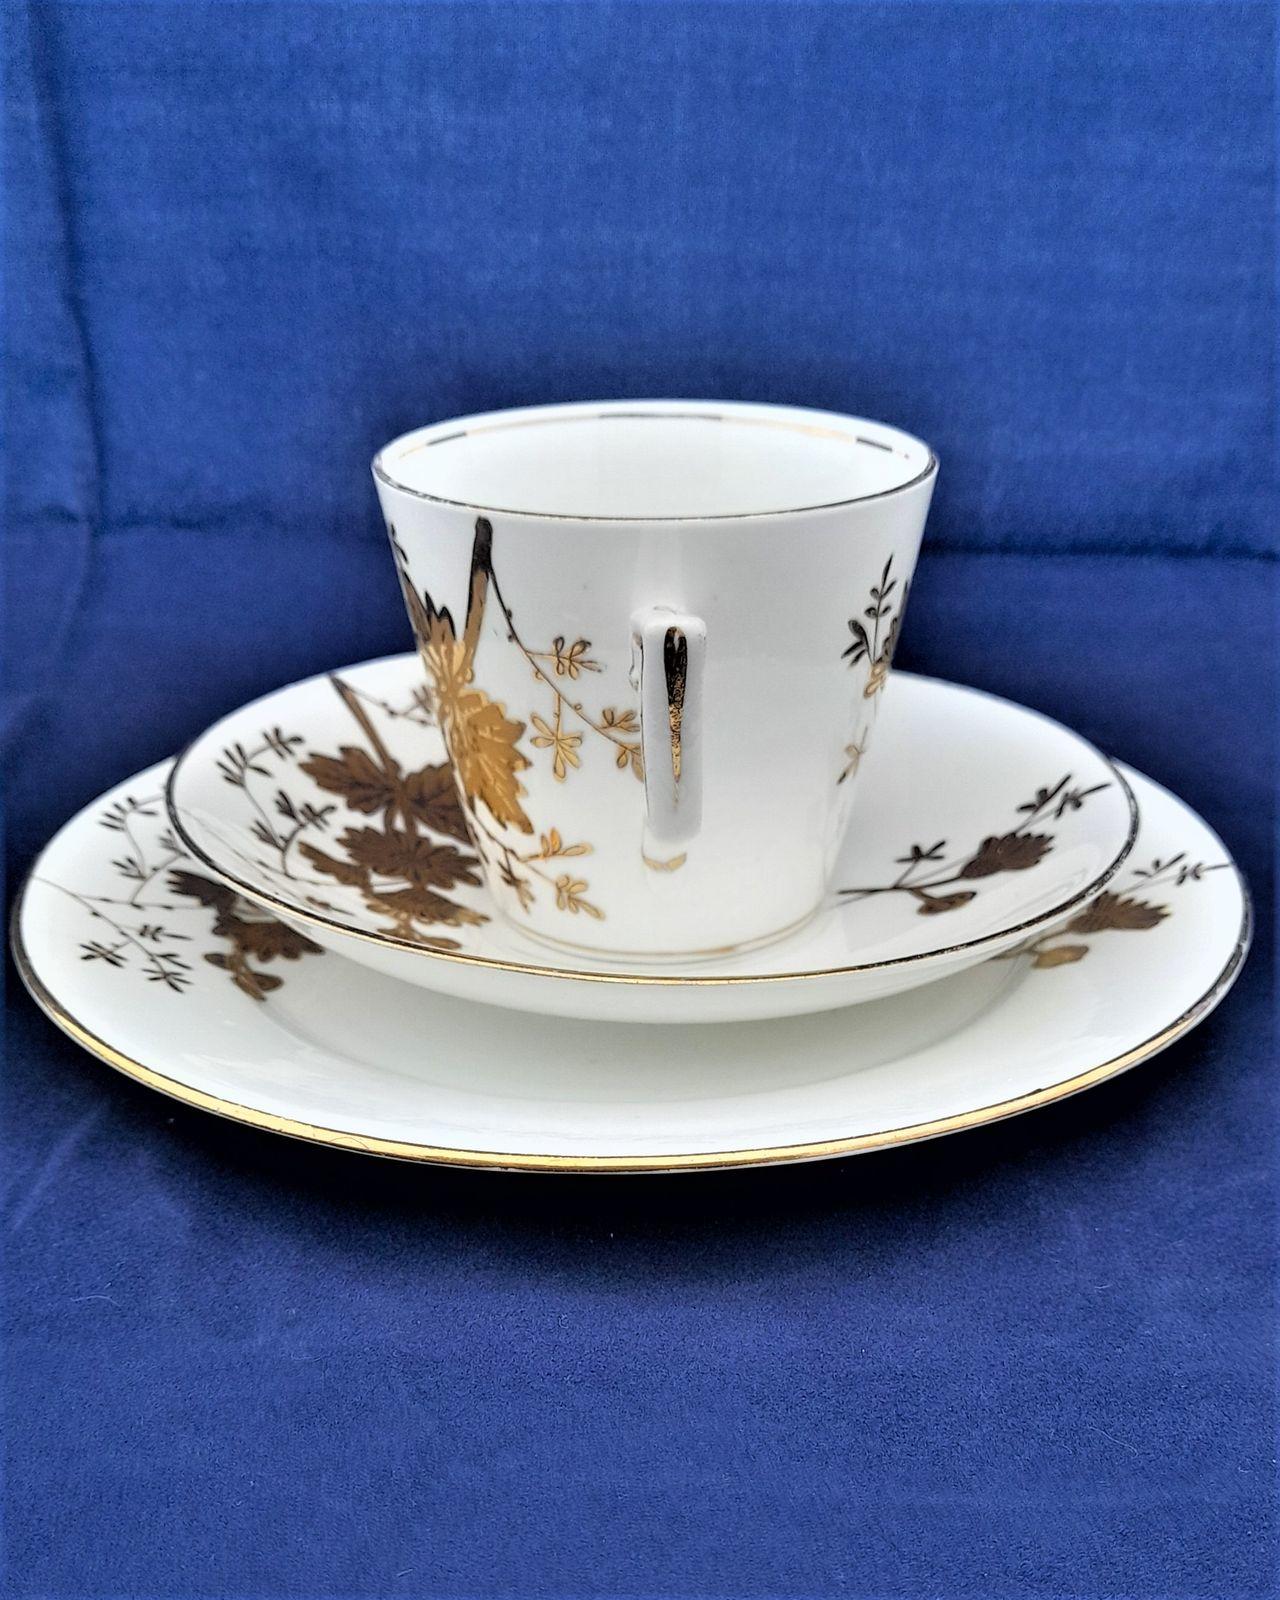 Wileman & Co Foley China pre-Shelley Porcelain Trio Cup Saucer & Plate - Victoria Shape decorated in the Gilded Aster Pattern 3980 Antique ca 1889 -2